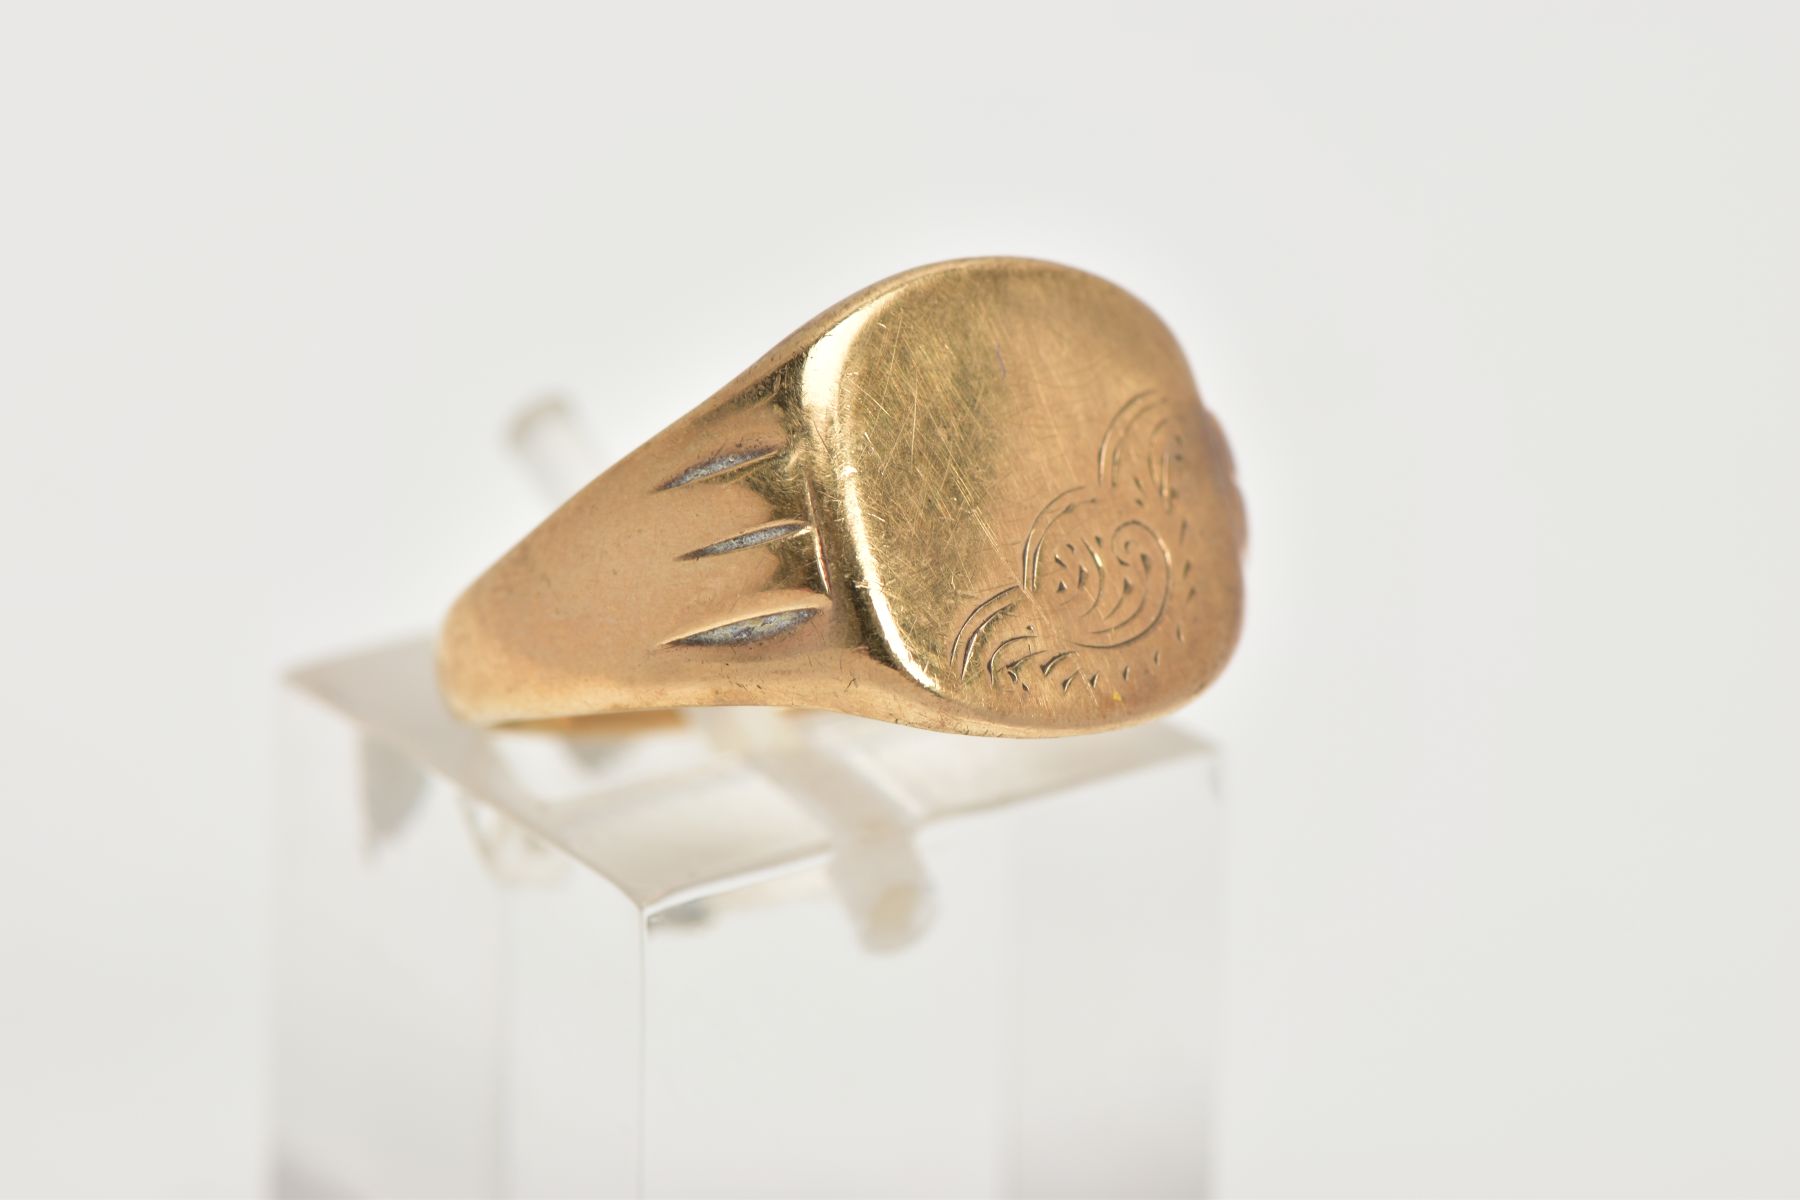 A 9CT GOLD SQUARE SIGNET RING, engraved detail on the face, approximately 12.4mm at the widest - Image 4 of 4